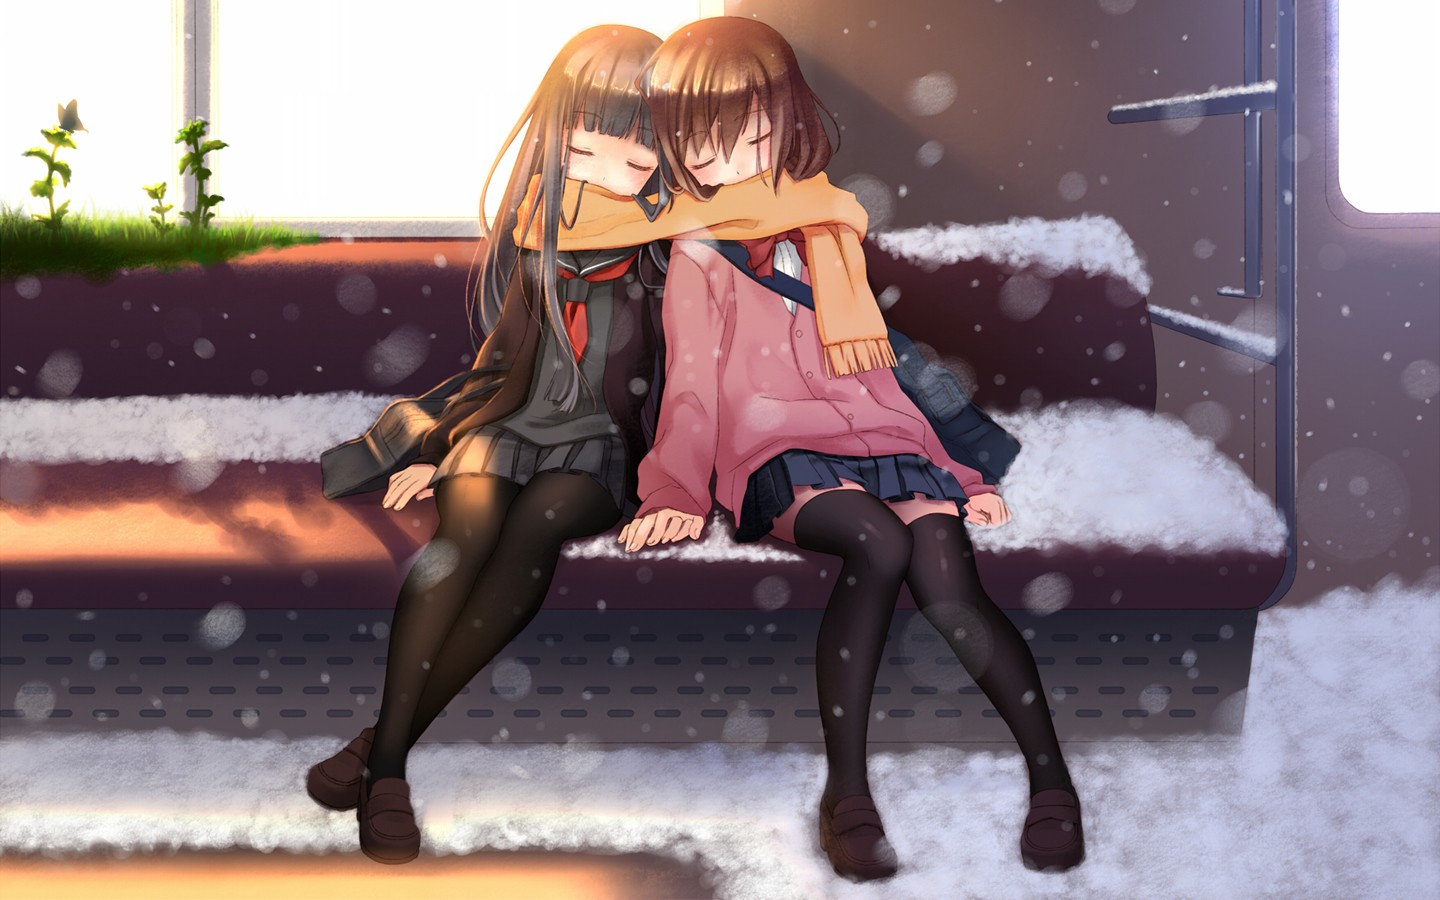 Anime 1440x900 anime girls original characters snow scarf two women legs together thighs together sitting closed eyes winter cold outdoors miniskirt stockings pantyhose